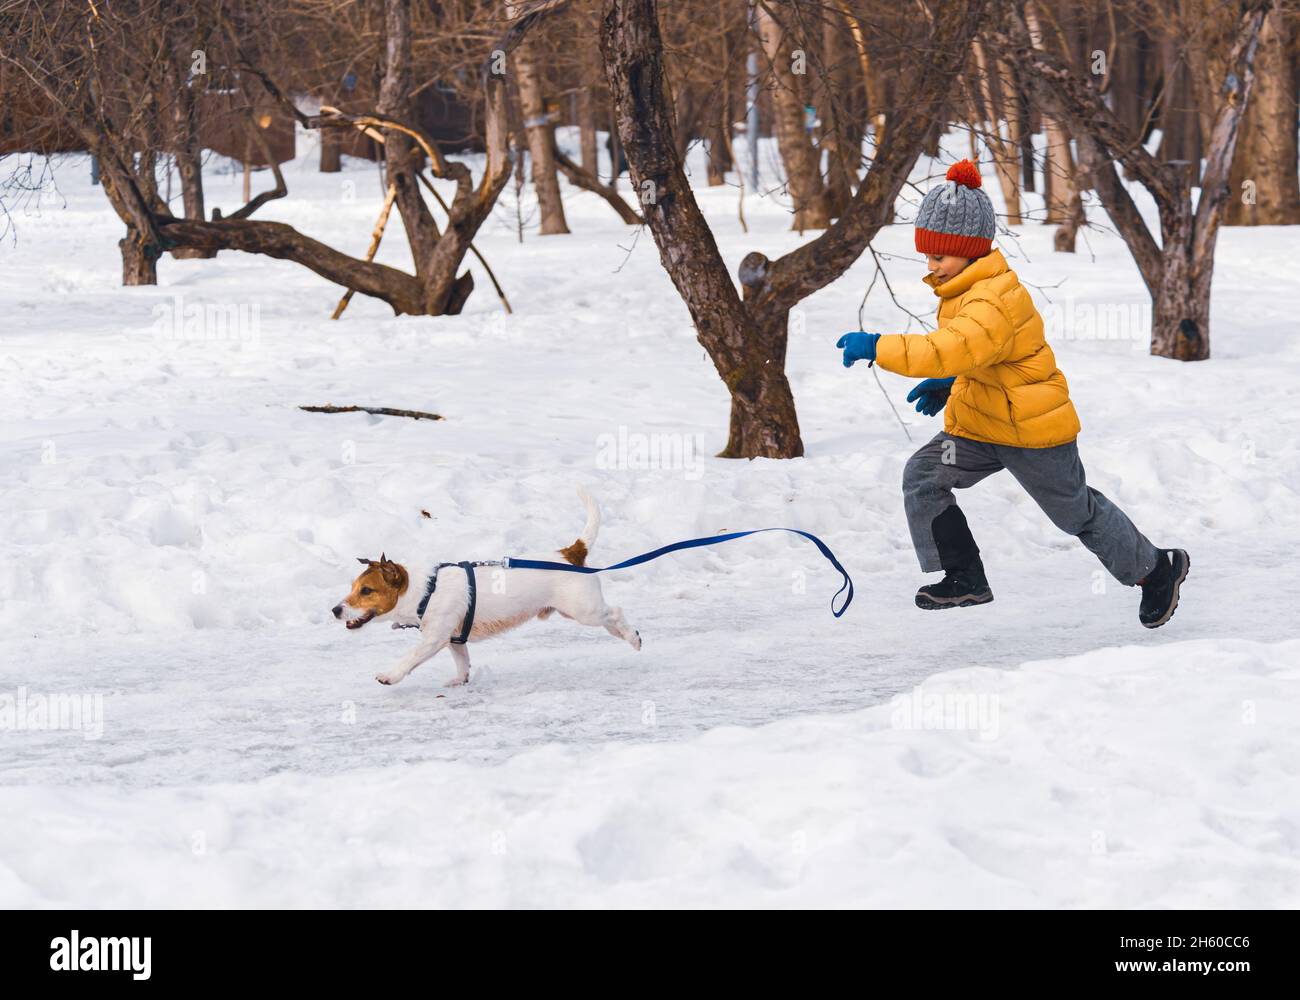 Dog escaped from leash and runs away from pet owner. Kid chasing dog lost in park Stock Photo